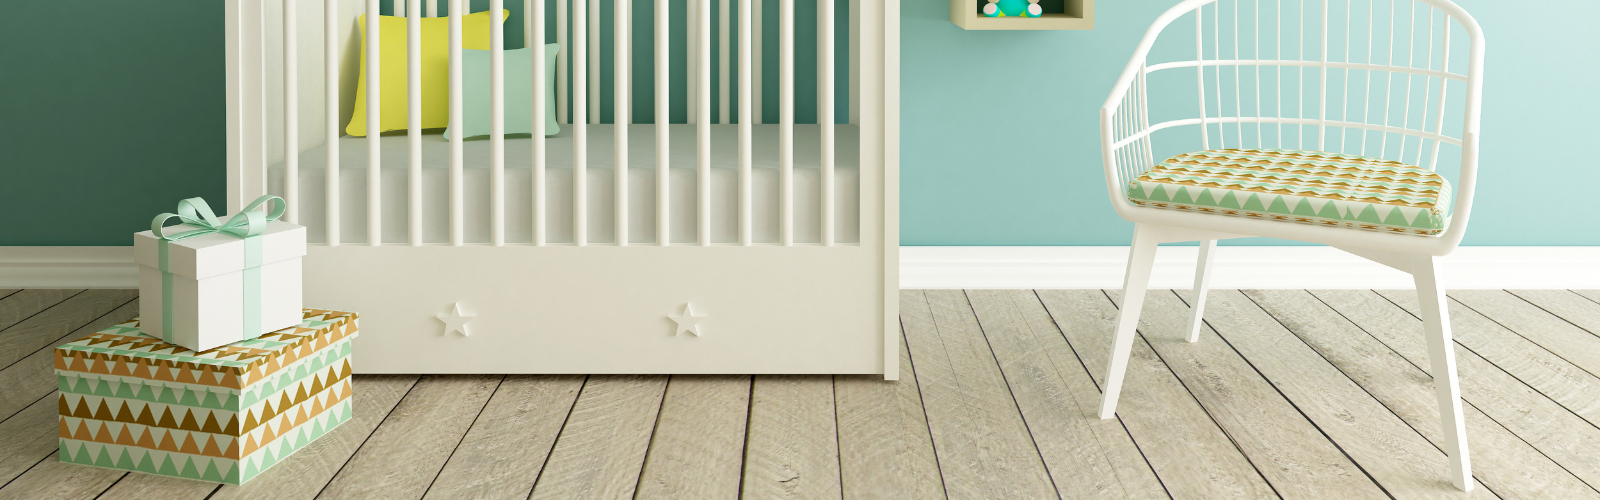 What Are The Best Flooring Options To Use In The Nursery?